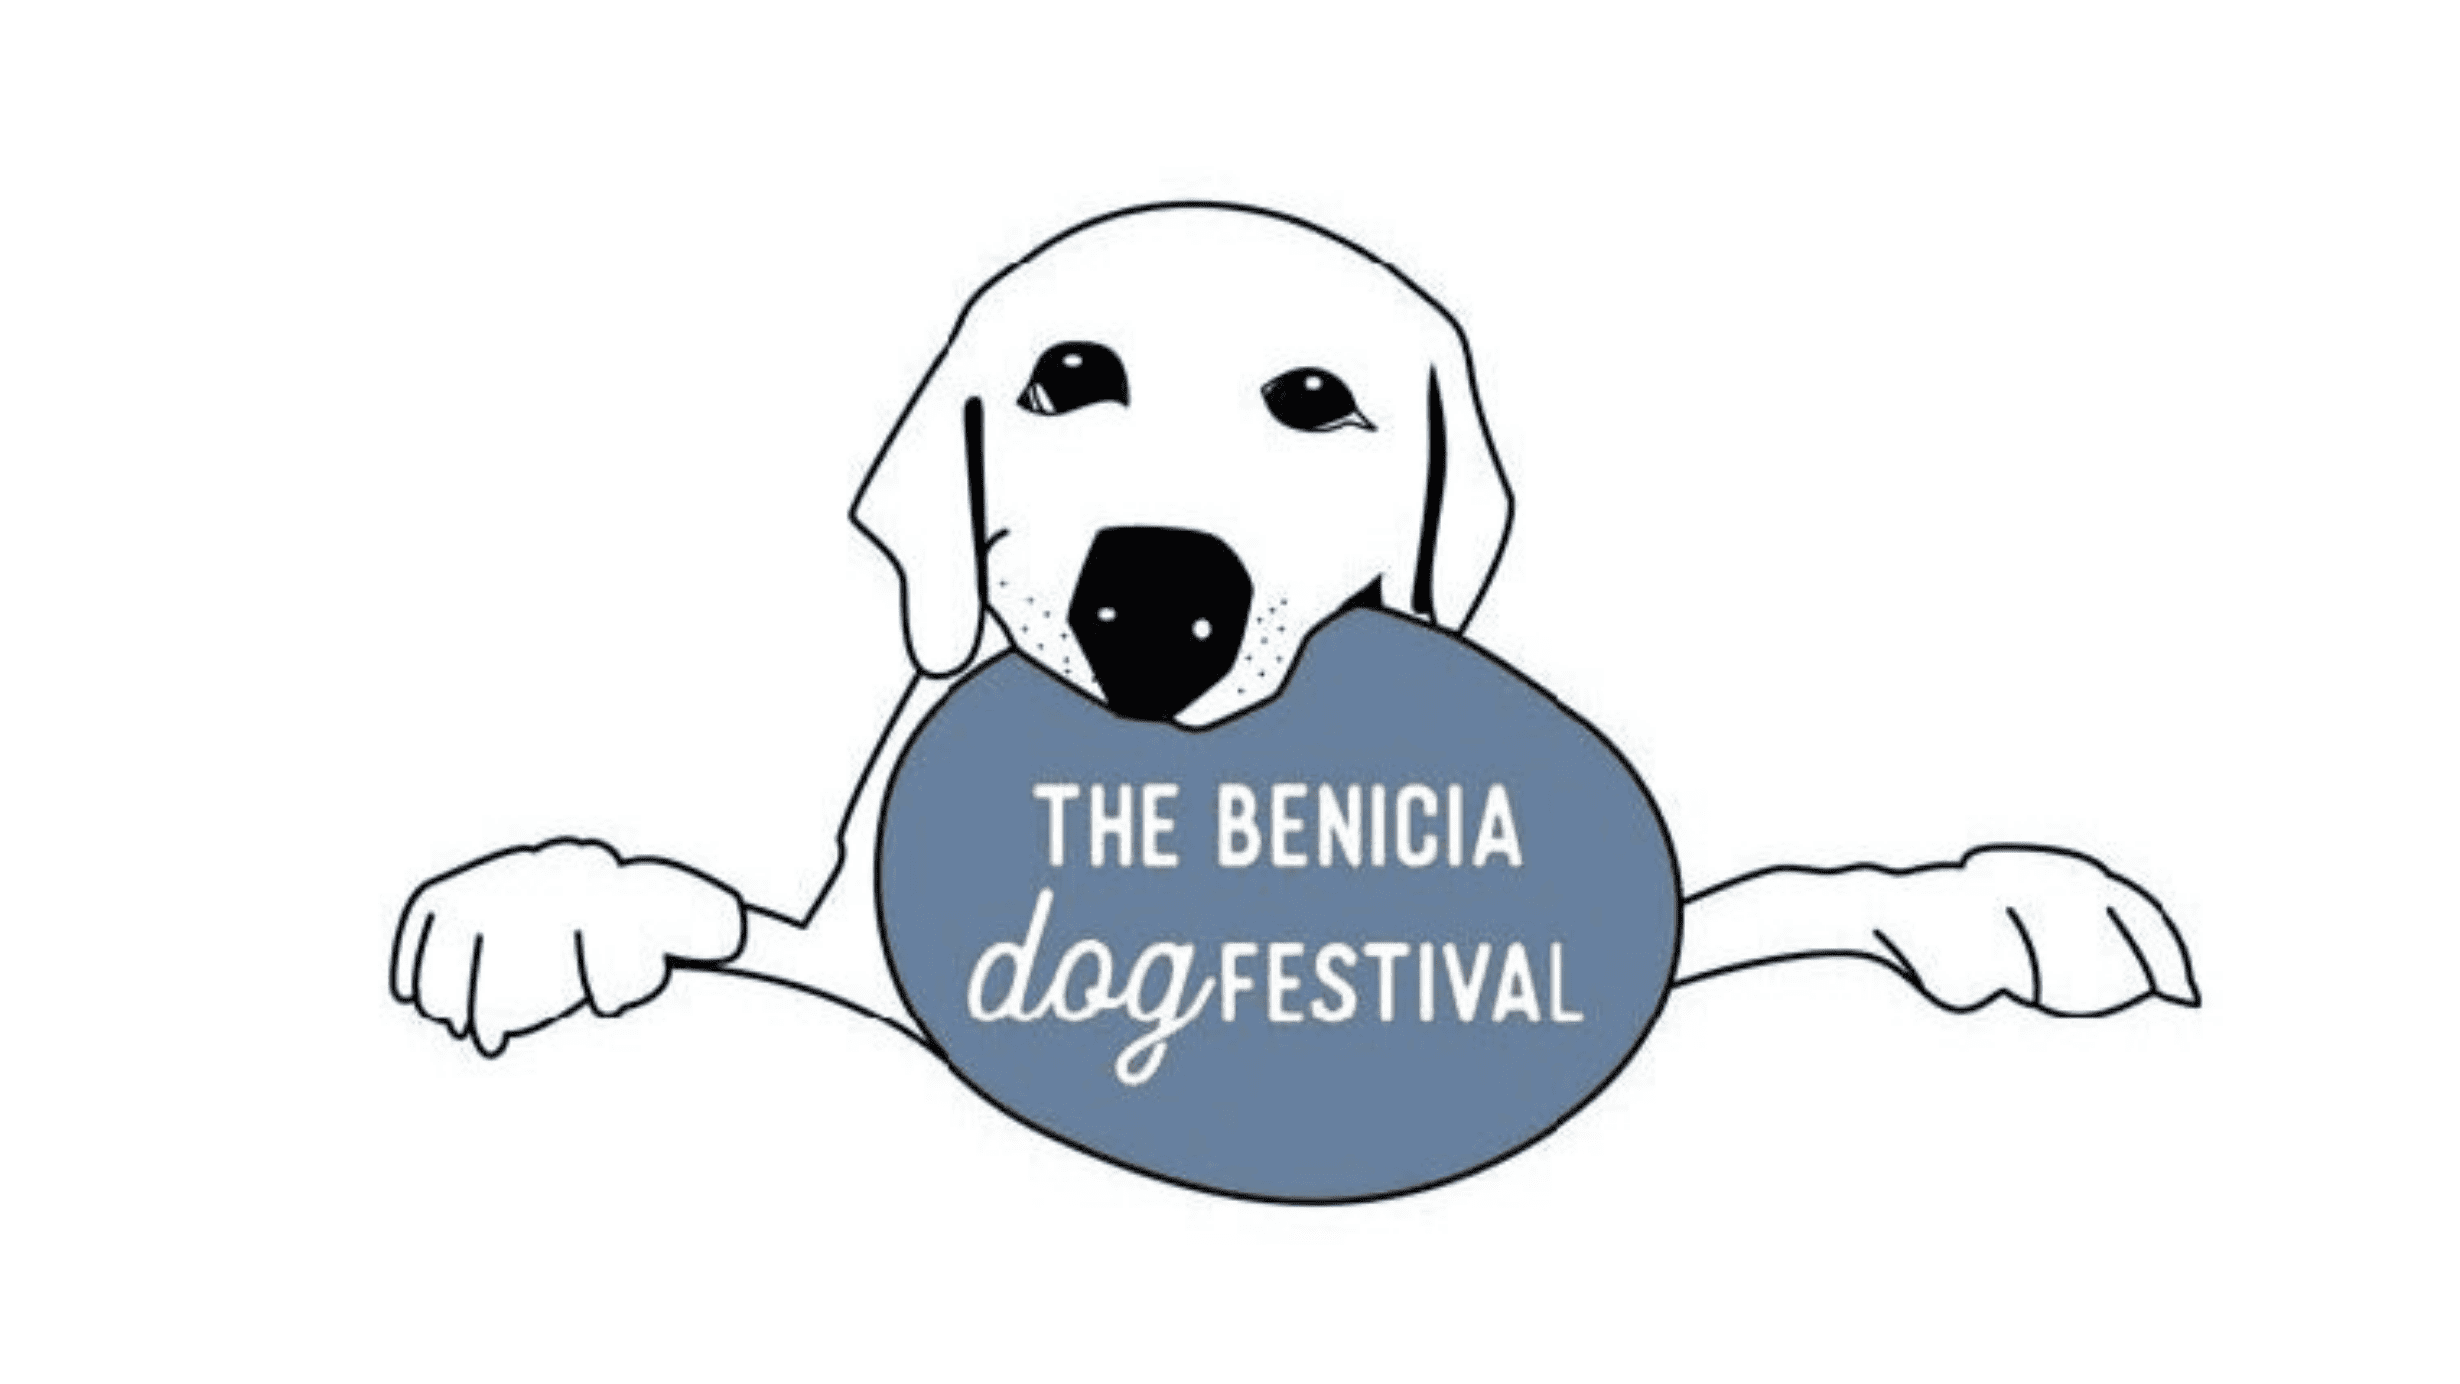 The benica dog festival logo with a dog holding a ball.